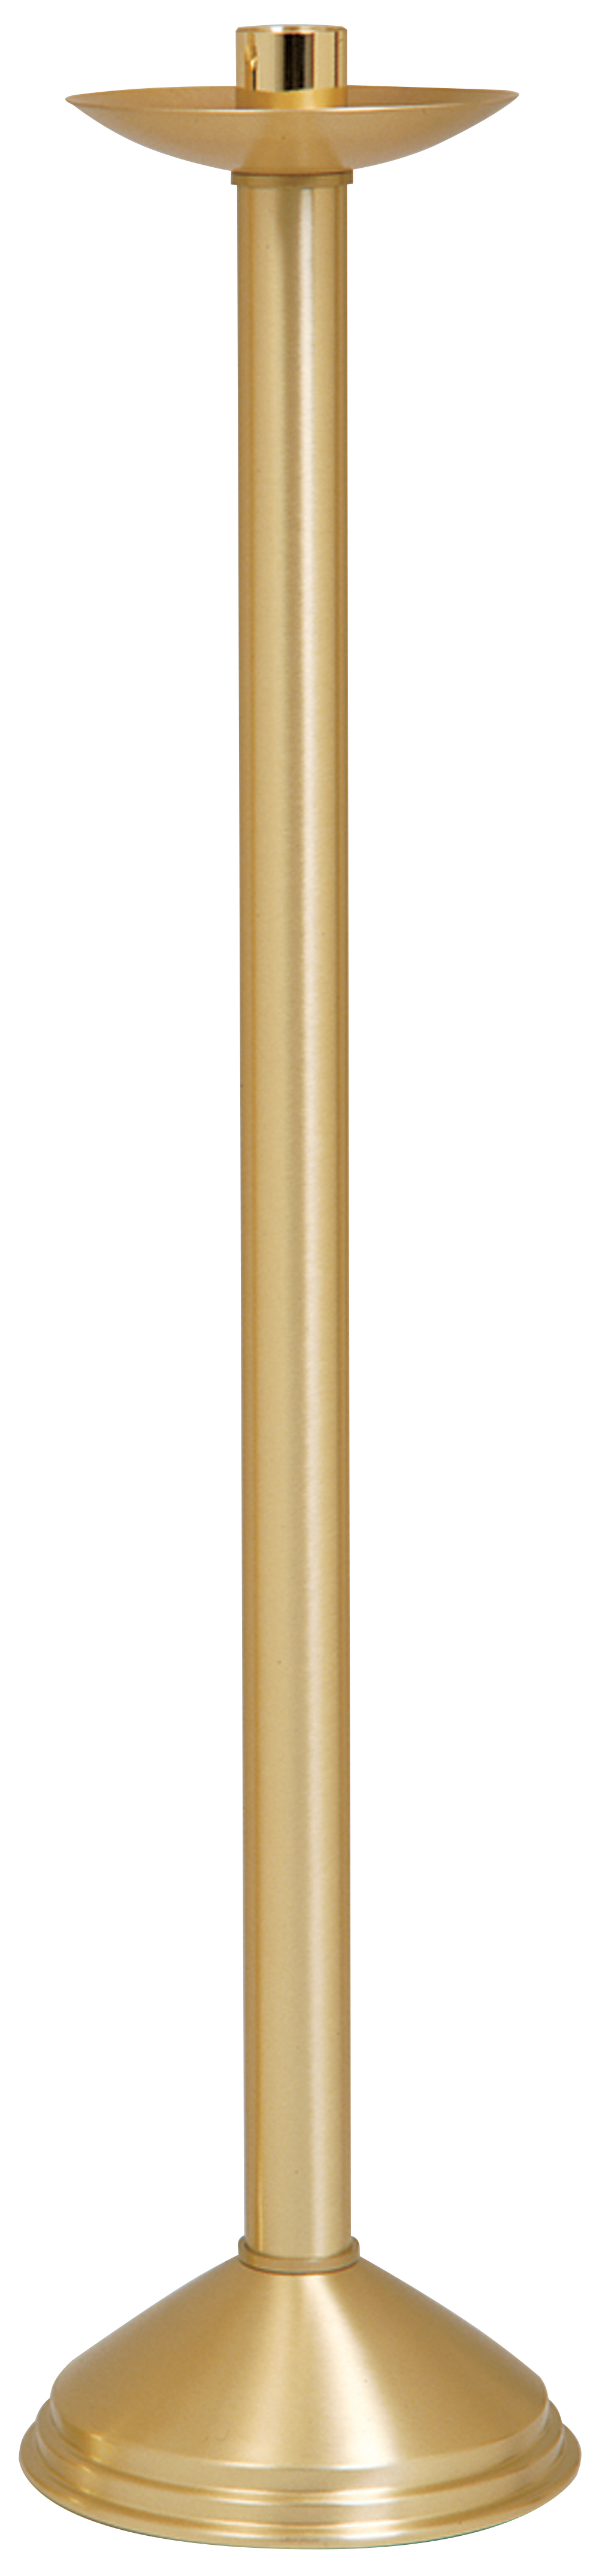 Paschal Candlestick 42 inch Processional 1 15/16 inch Socket